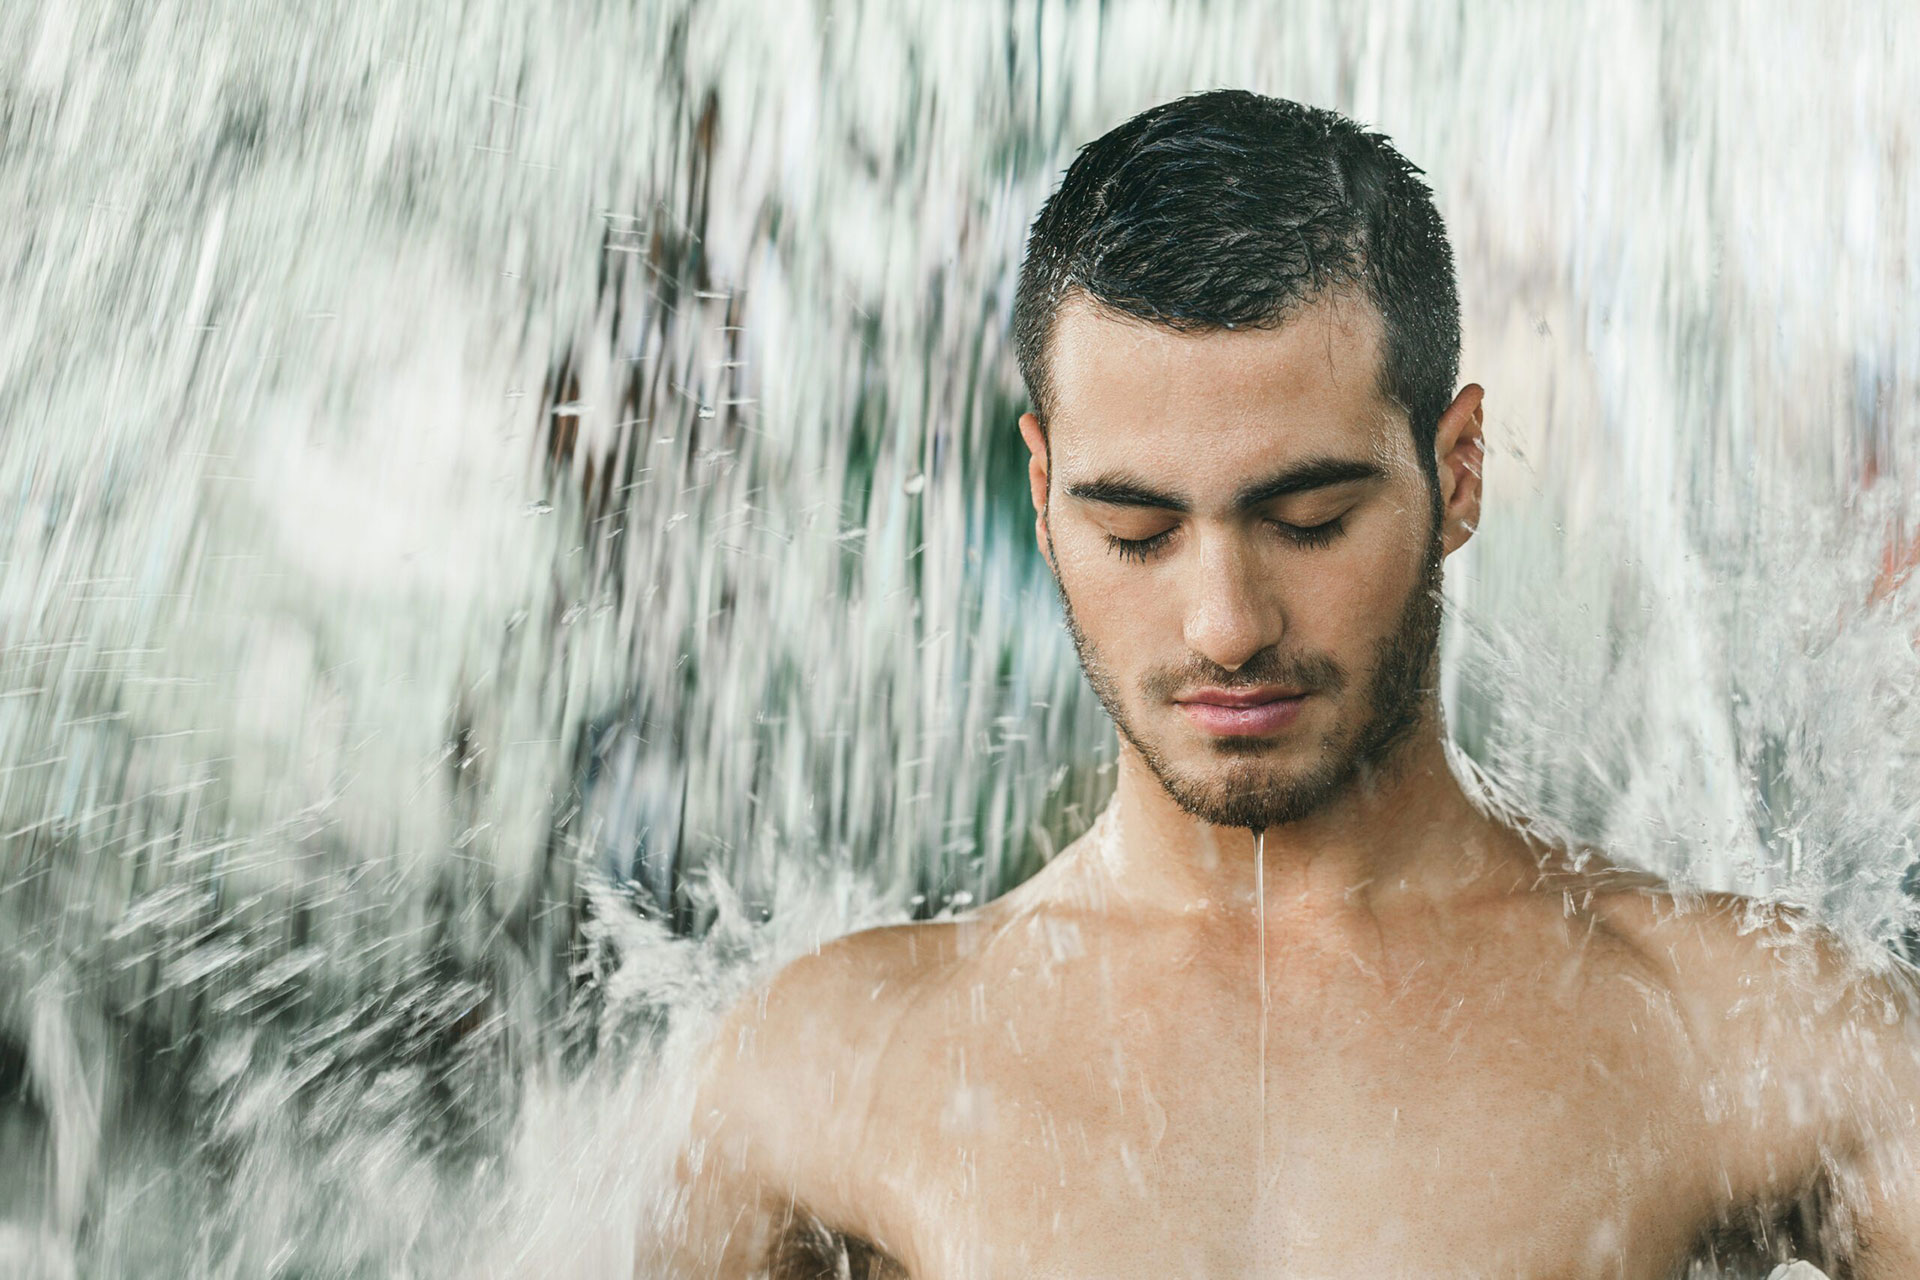 Man with eyes closed with water cascading over his body